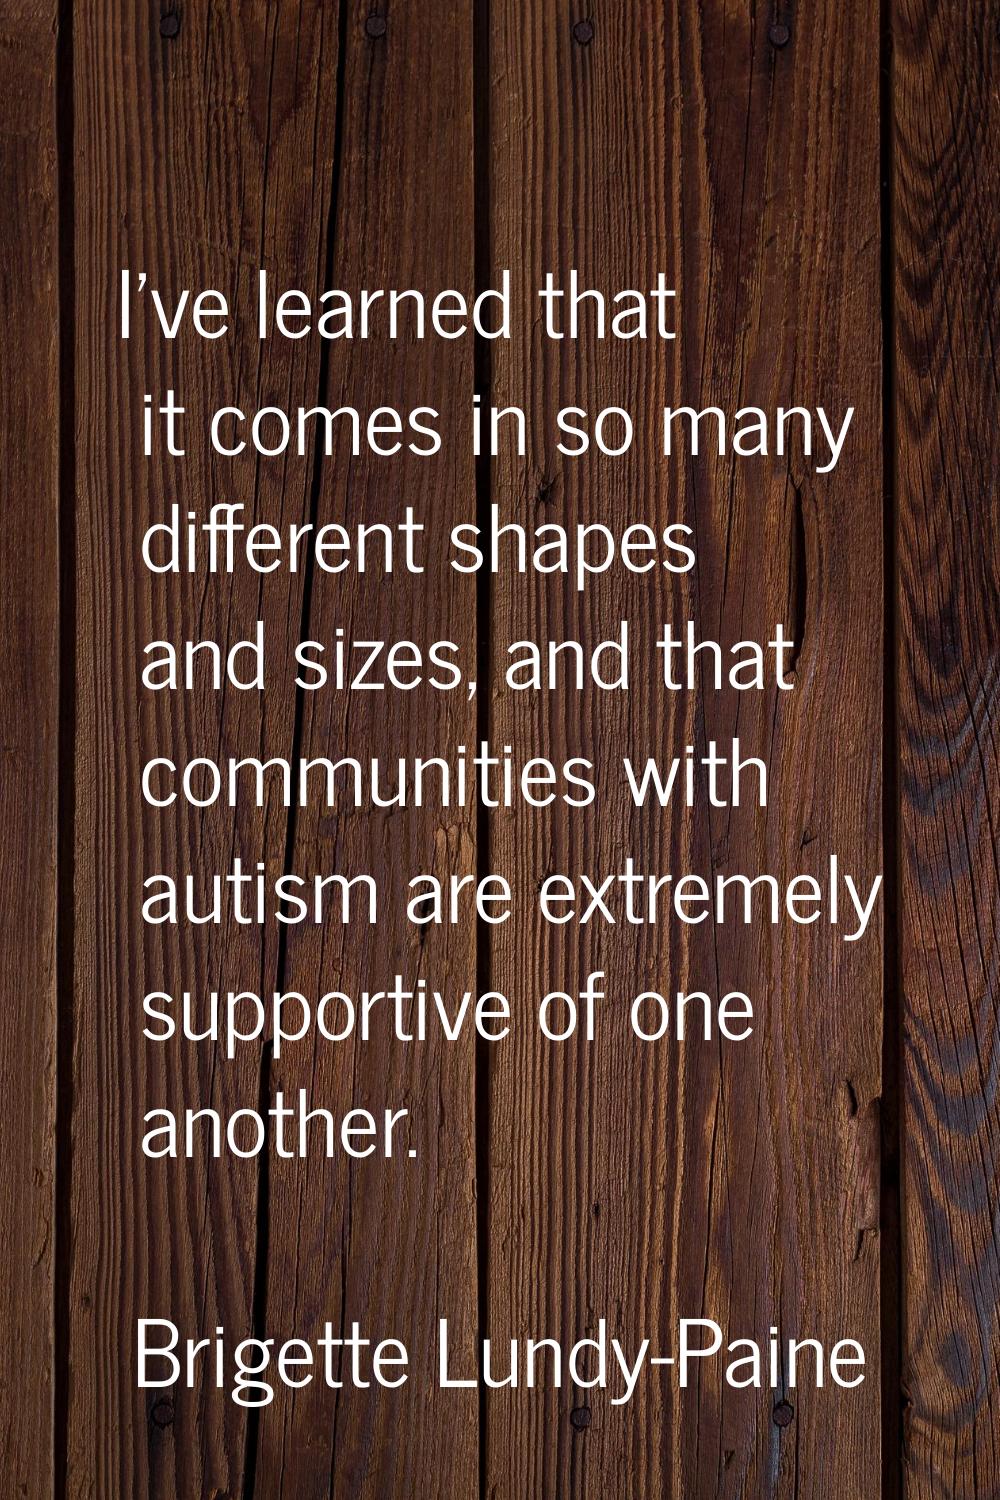 I've learned that it comes in so many different shapes and sizes, and that communities with autism 